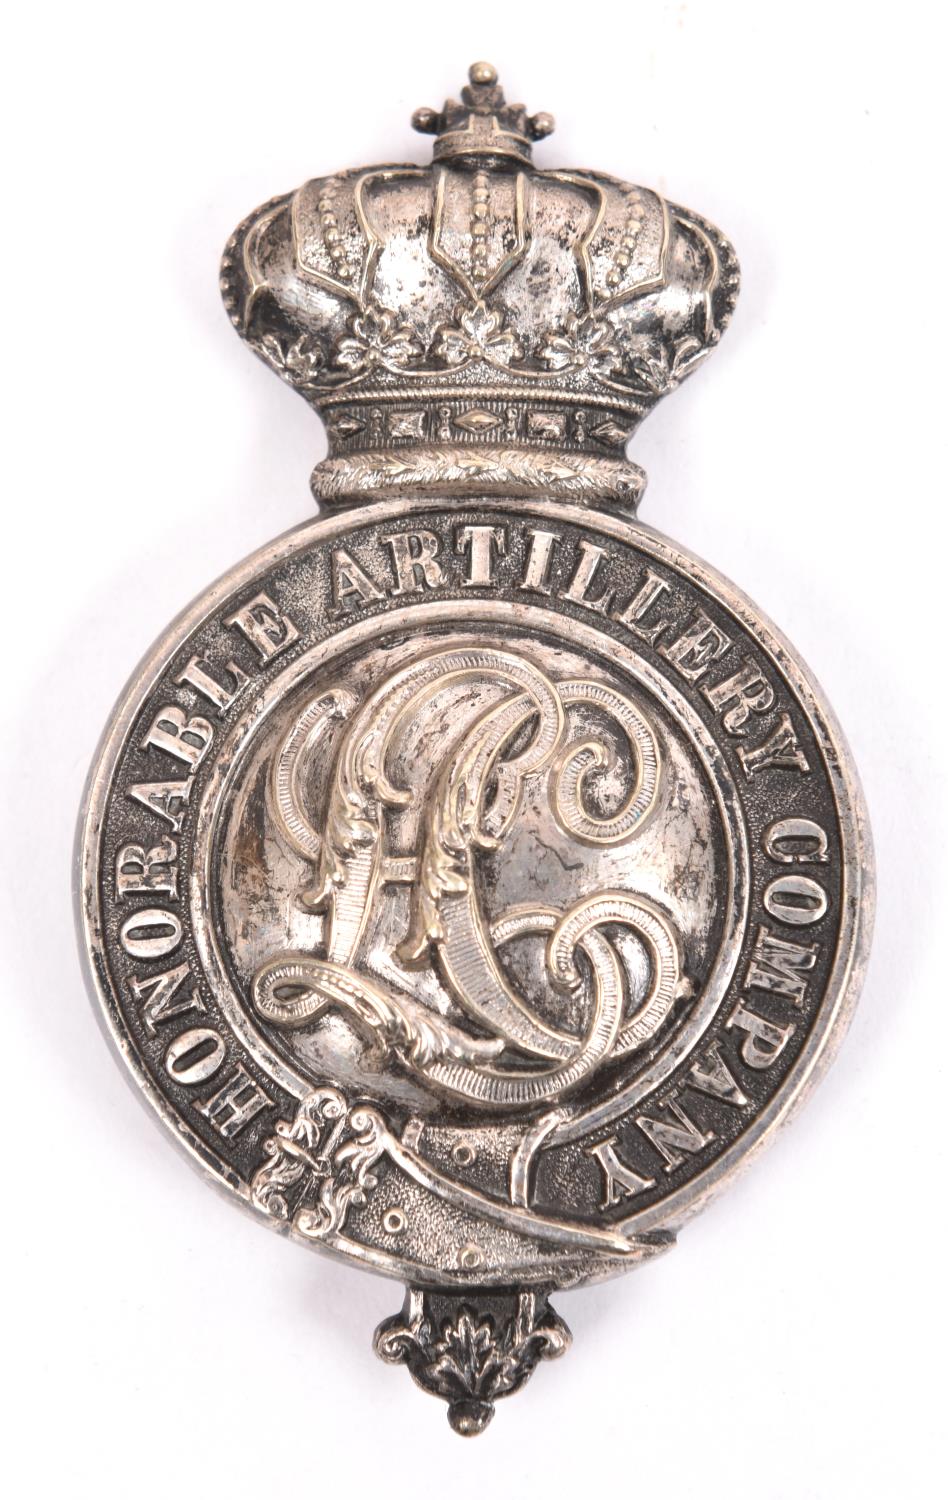 An officer's silver plated undress sabretache badge of the Honourable Artillery Company Light